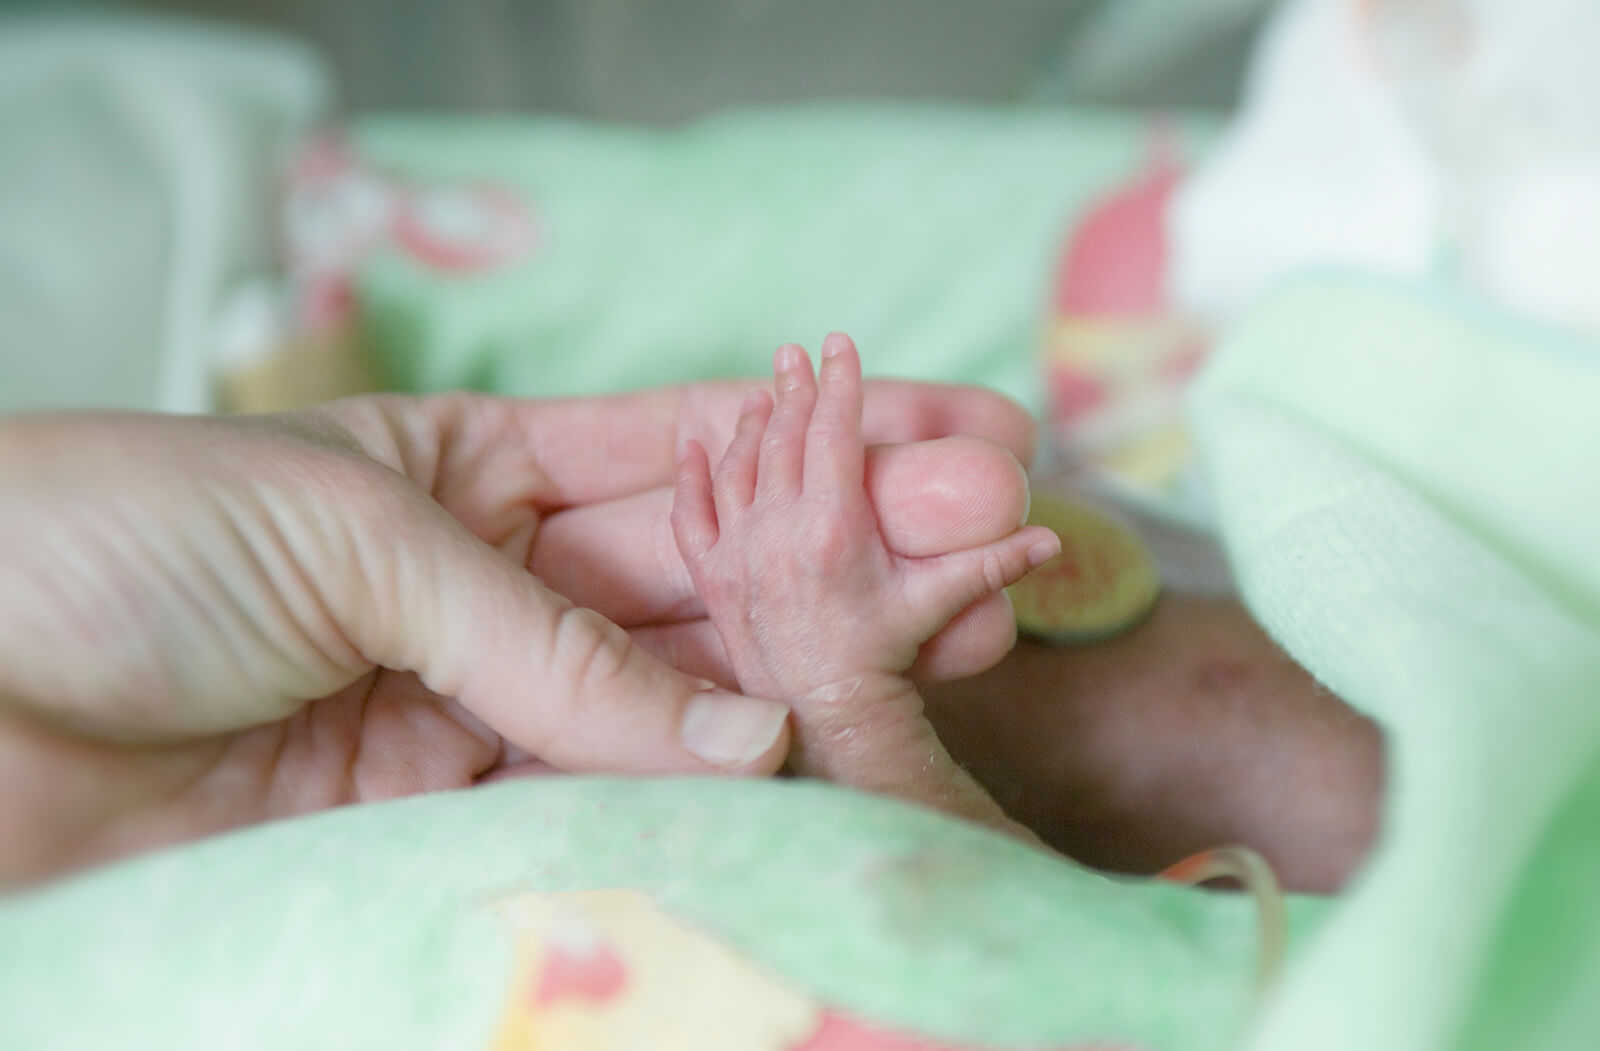 A Newborn Baby Clutches Their Parent's Finger at the Hospital